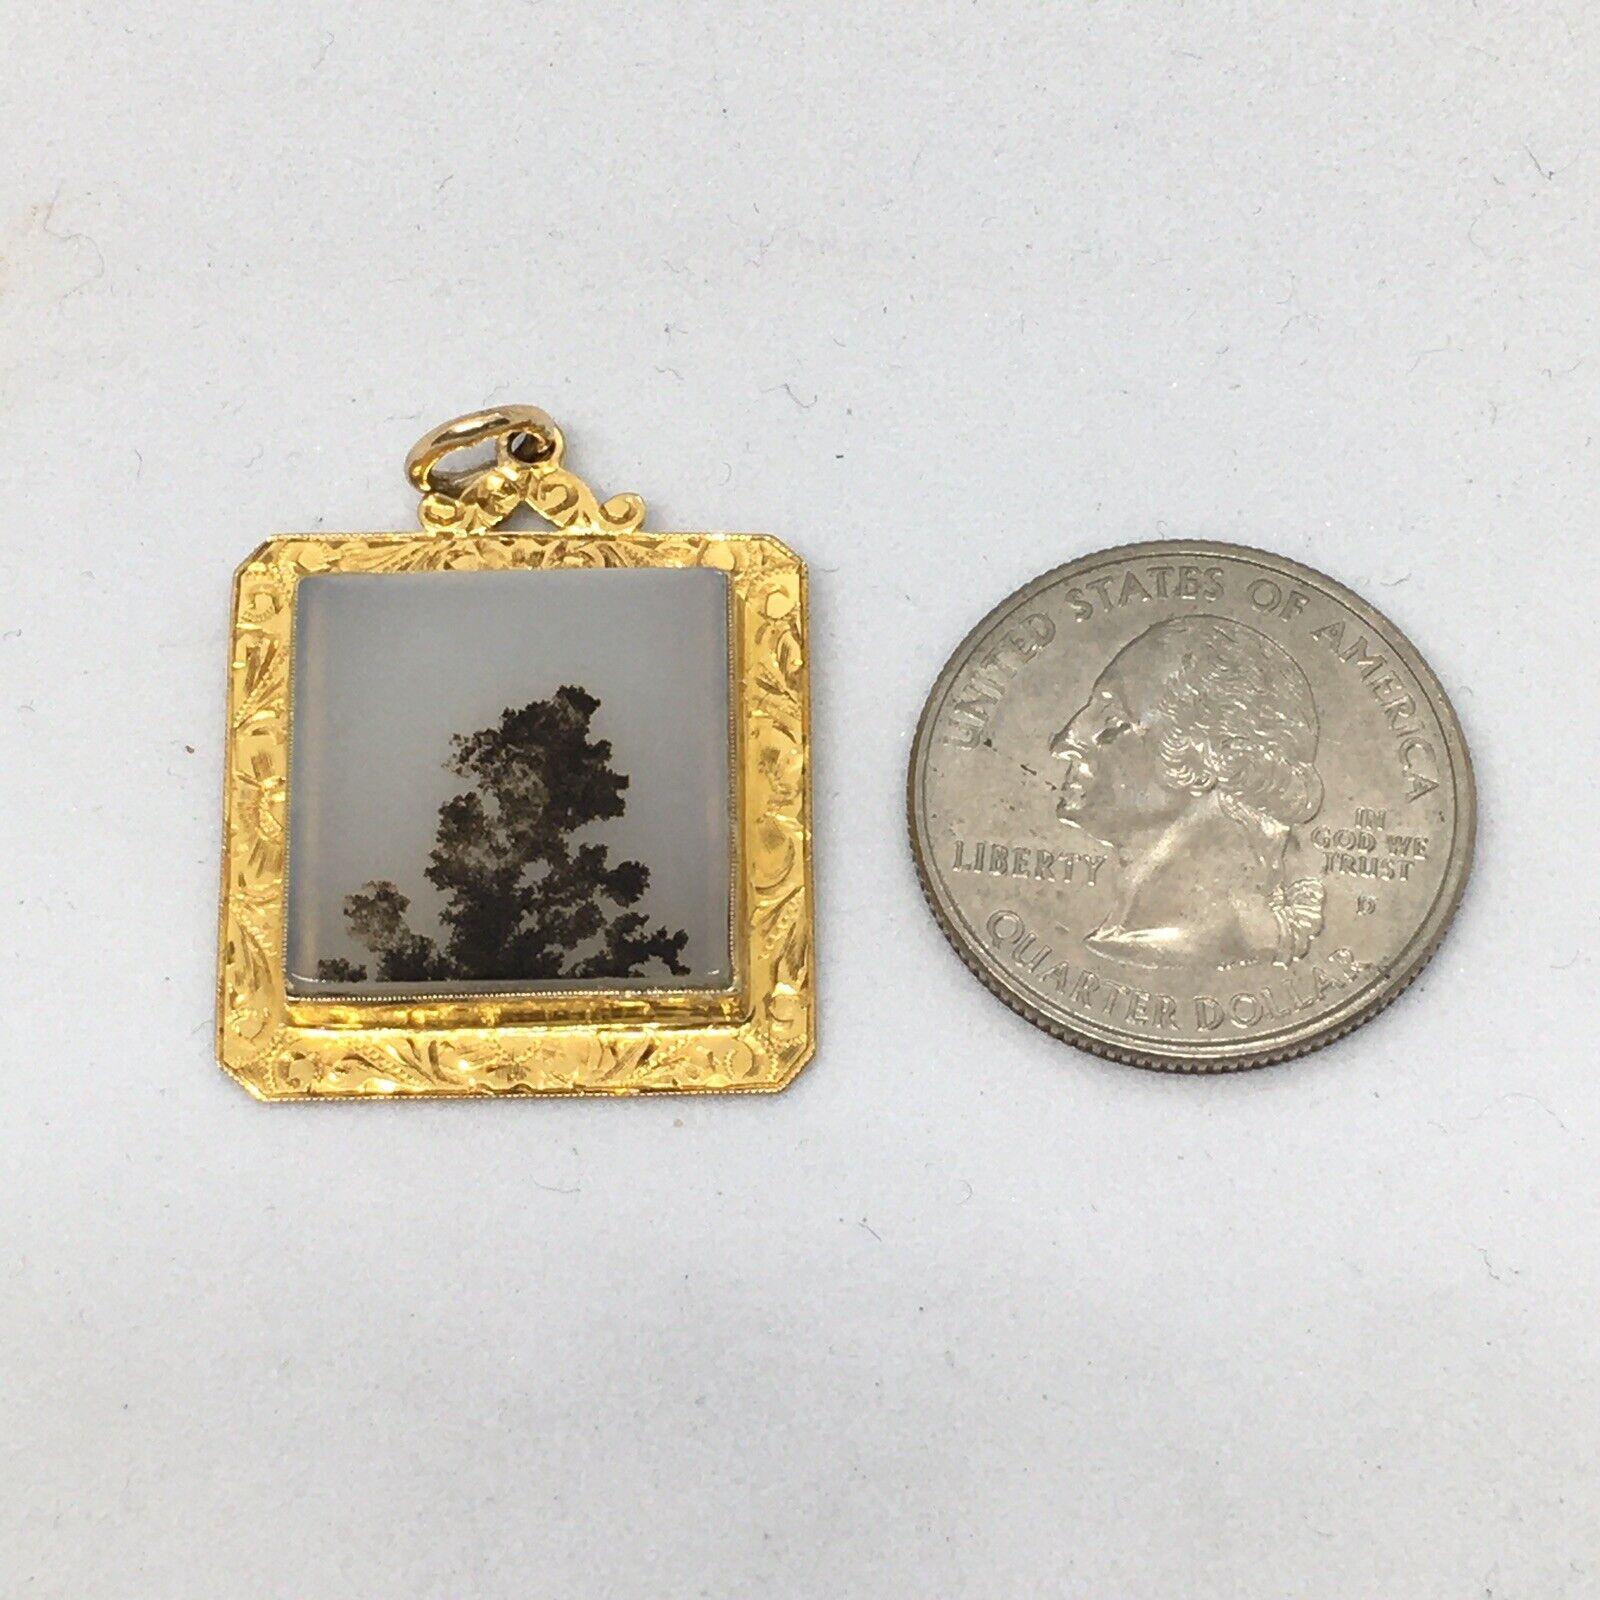 Victorian Dendritic Moss Agate and 14K Gold Pendant One Inch Square.


Natural Stone

Pendant measures 1 inch by 1 inch

Weighing 5.8 gram

No damage, see pictures